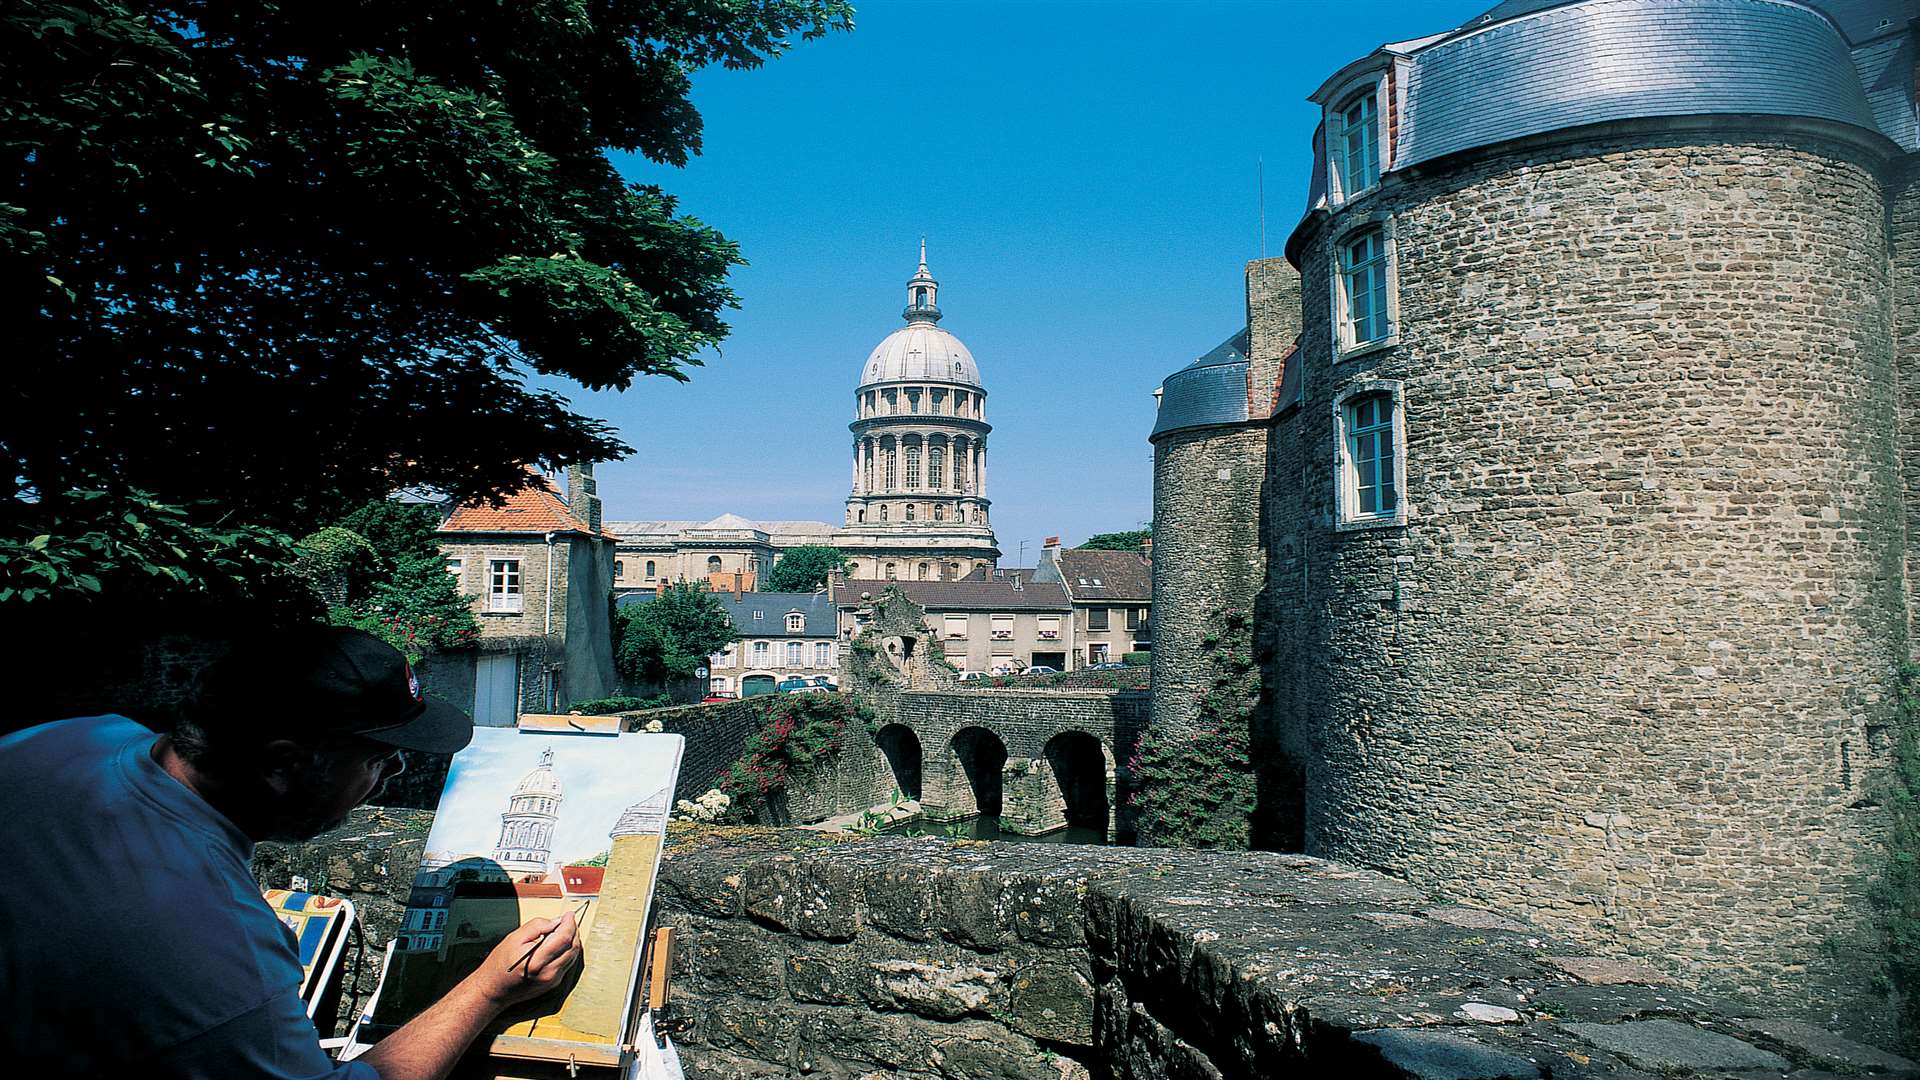 Make sure you allow time to explore Boulogne